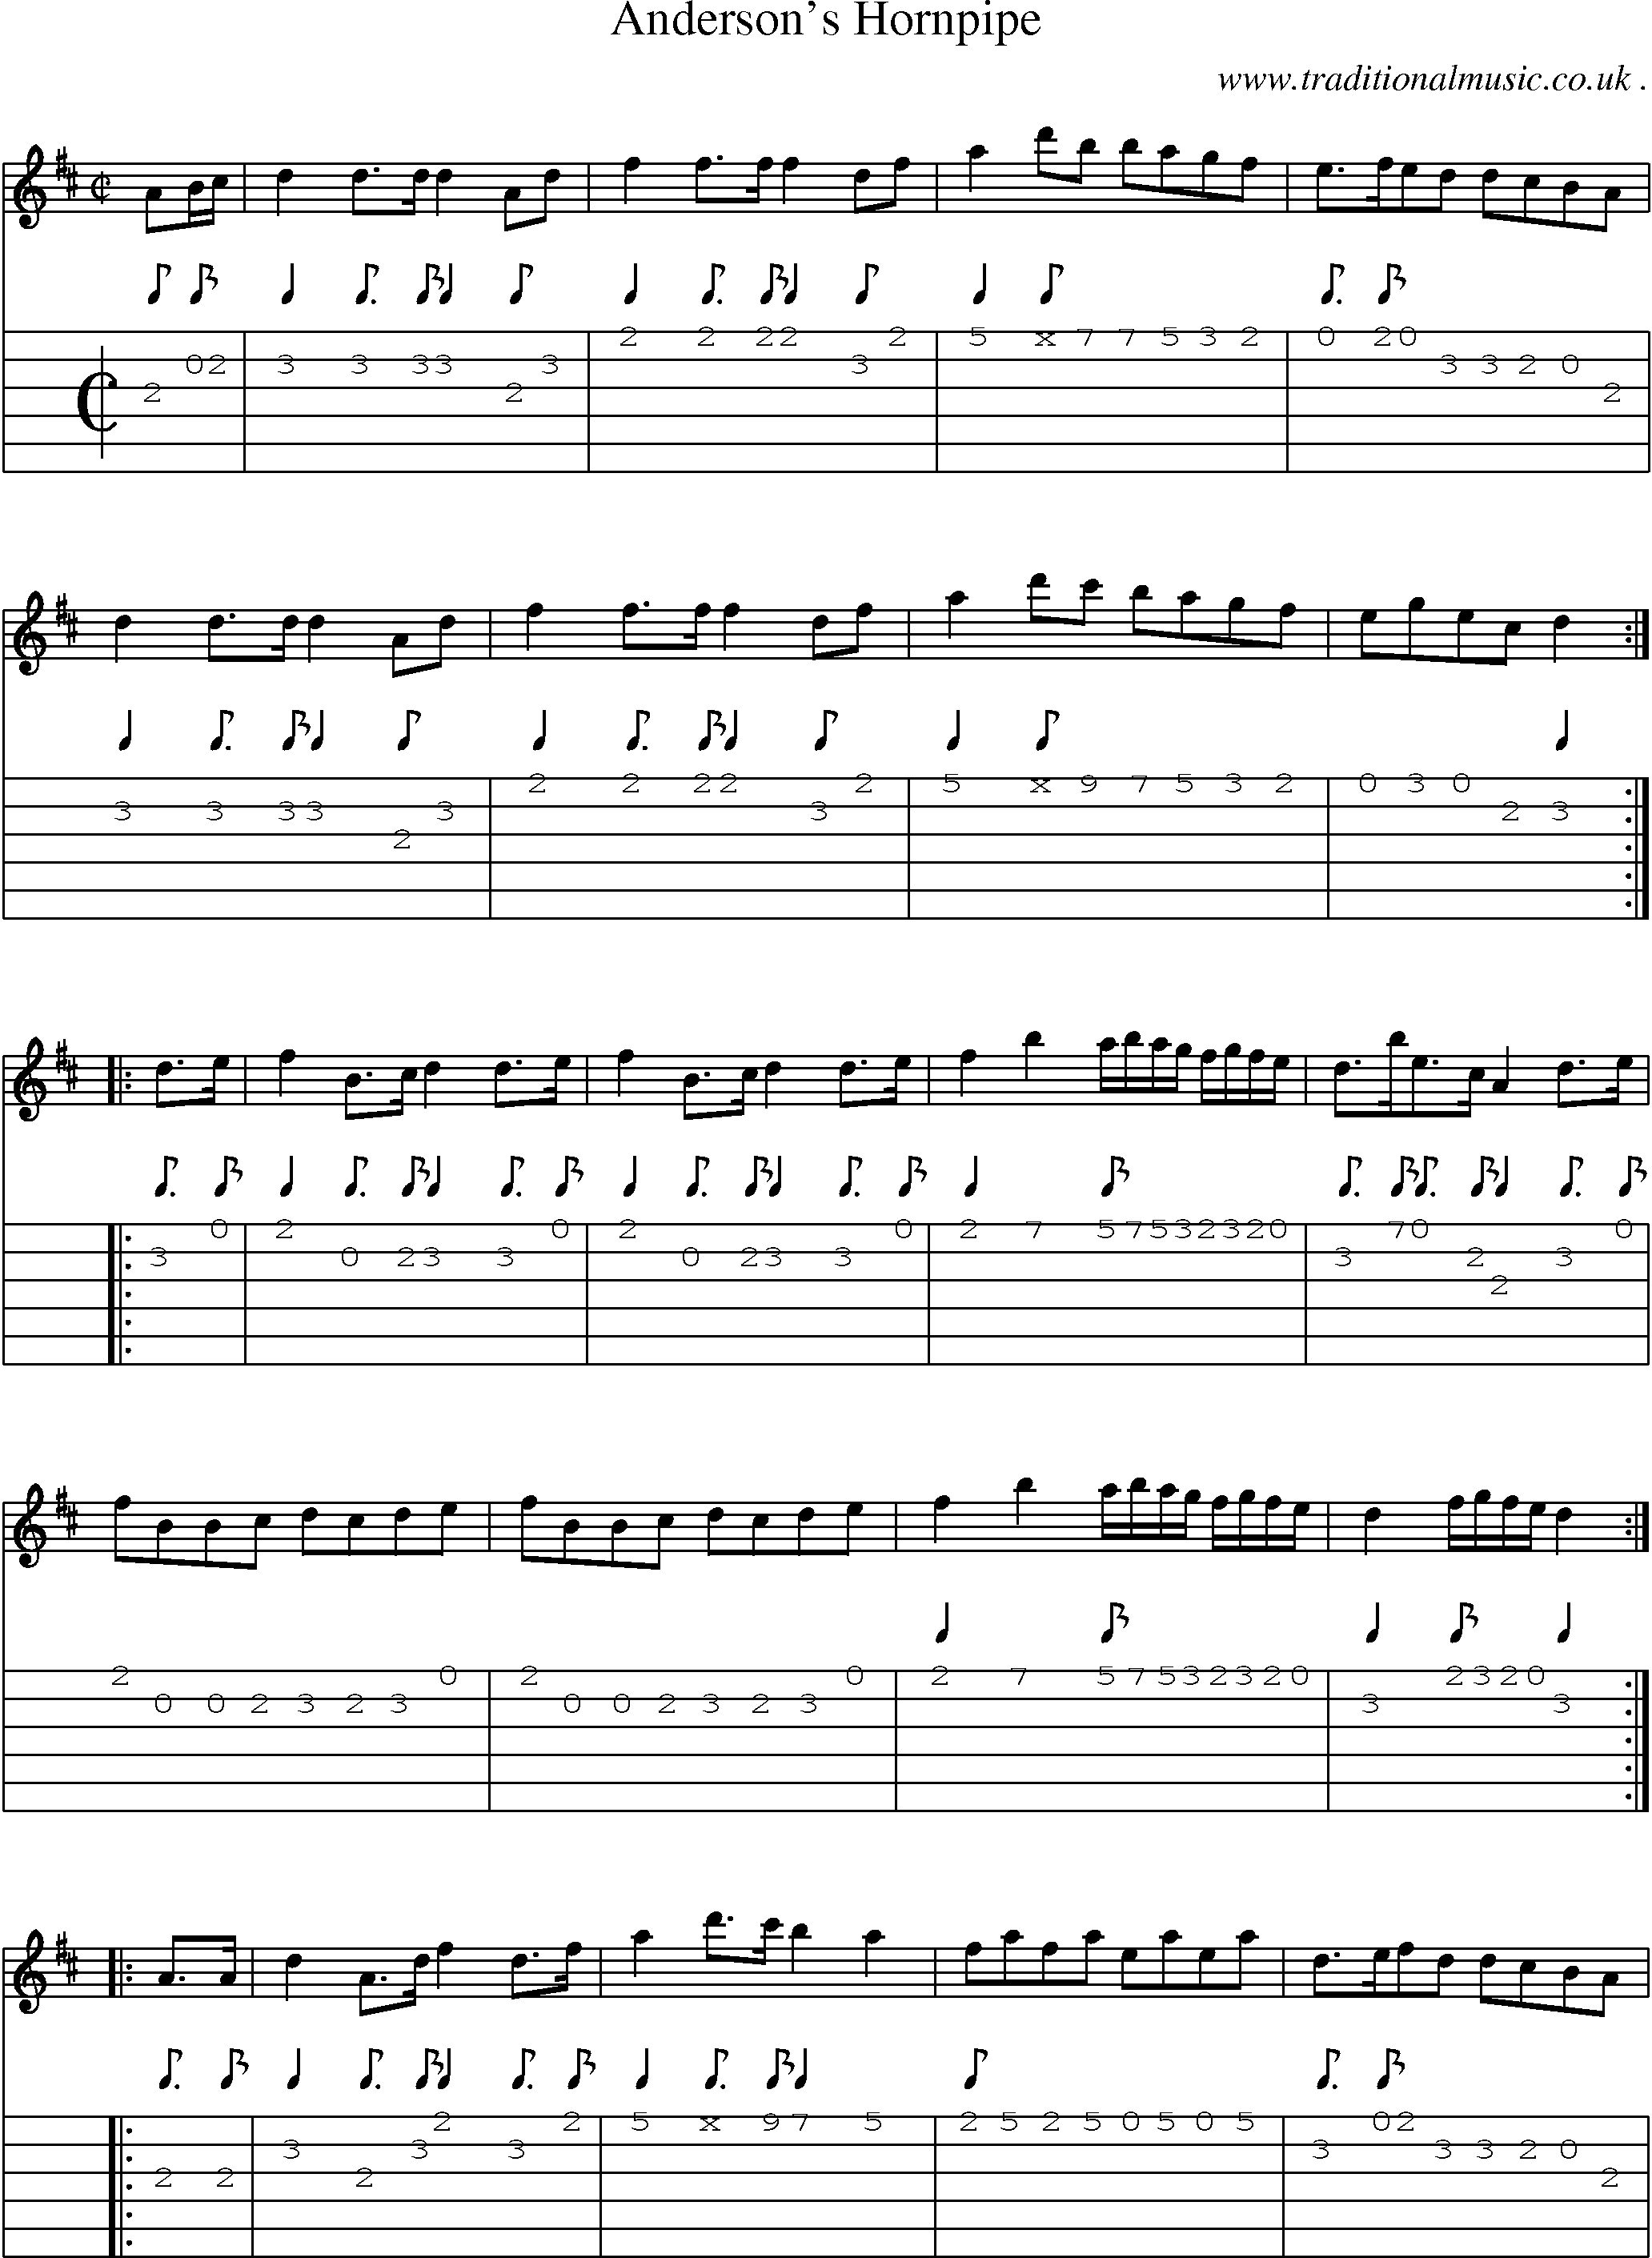 Sheet-Music and Guitar Tabs for Andersons Hornpipe